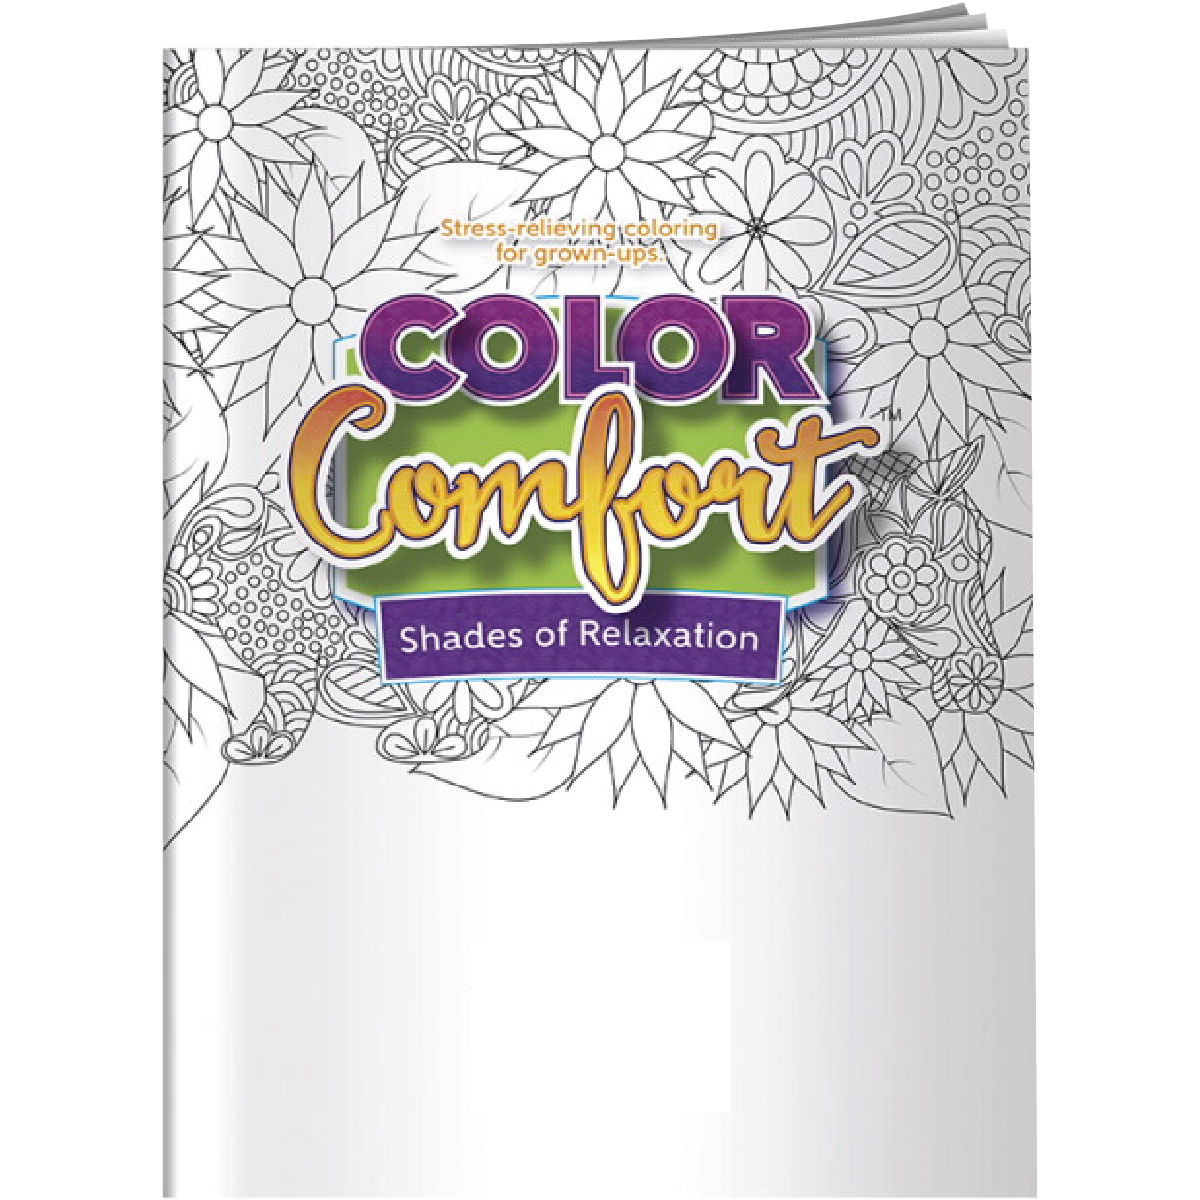 Screen Print 1 Color 1 Location Adult Coloring Book - Shades of Relaxation (Animals)